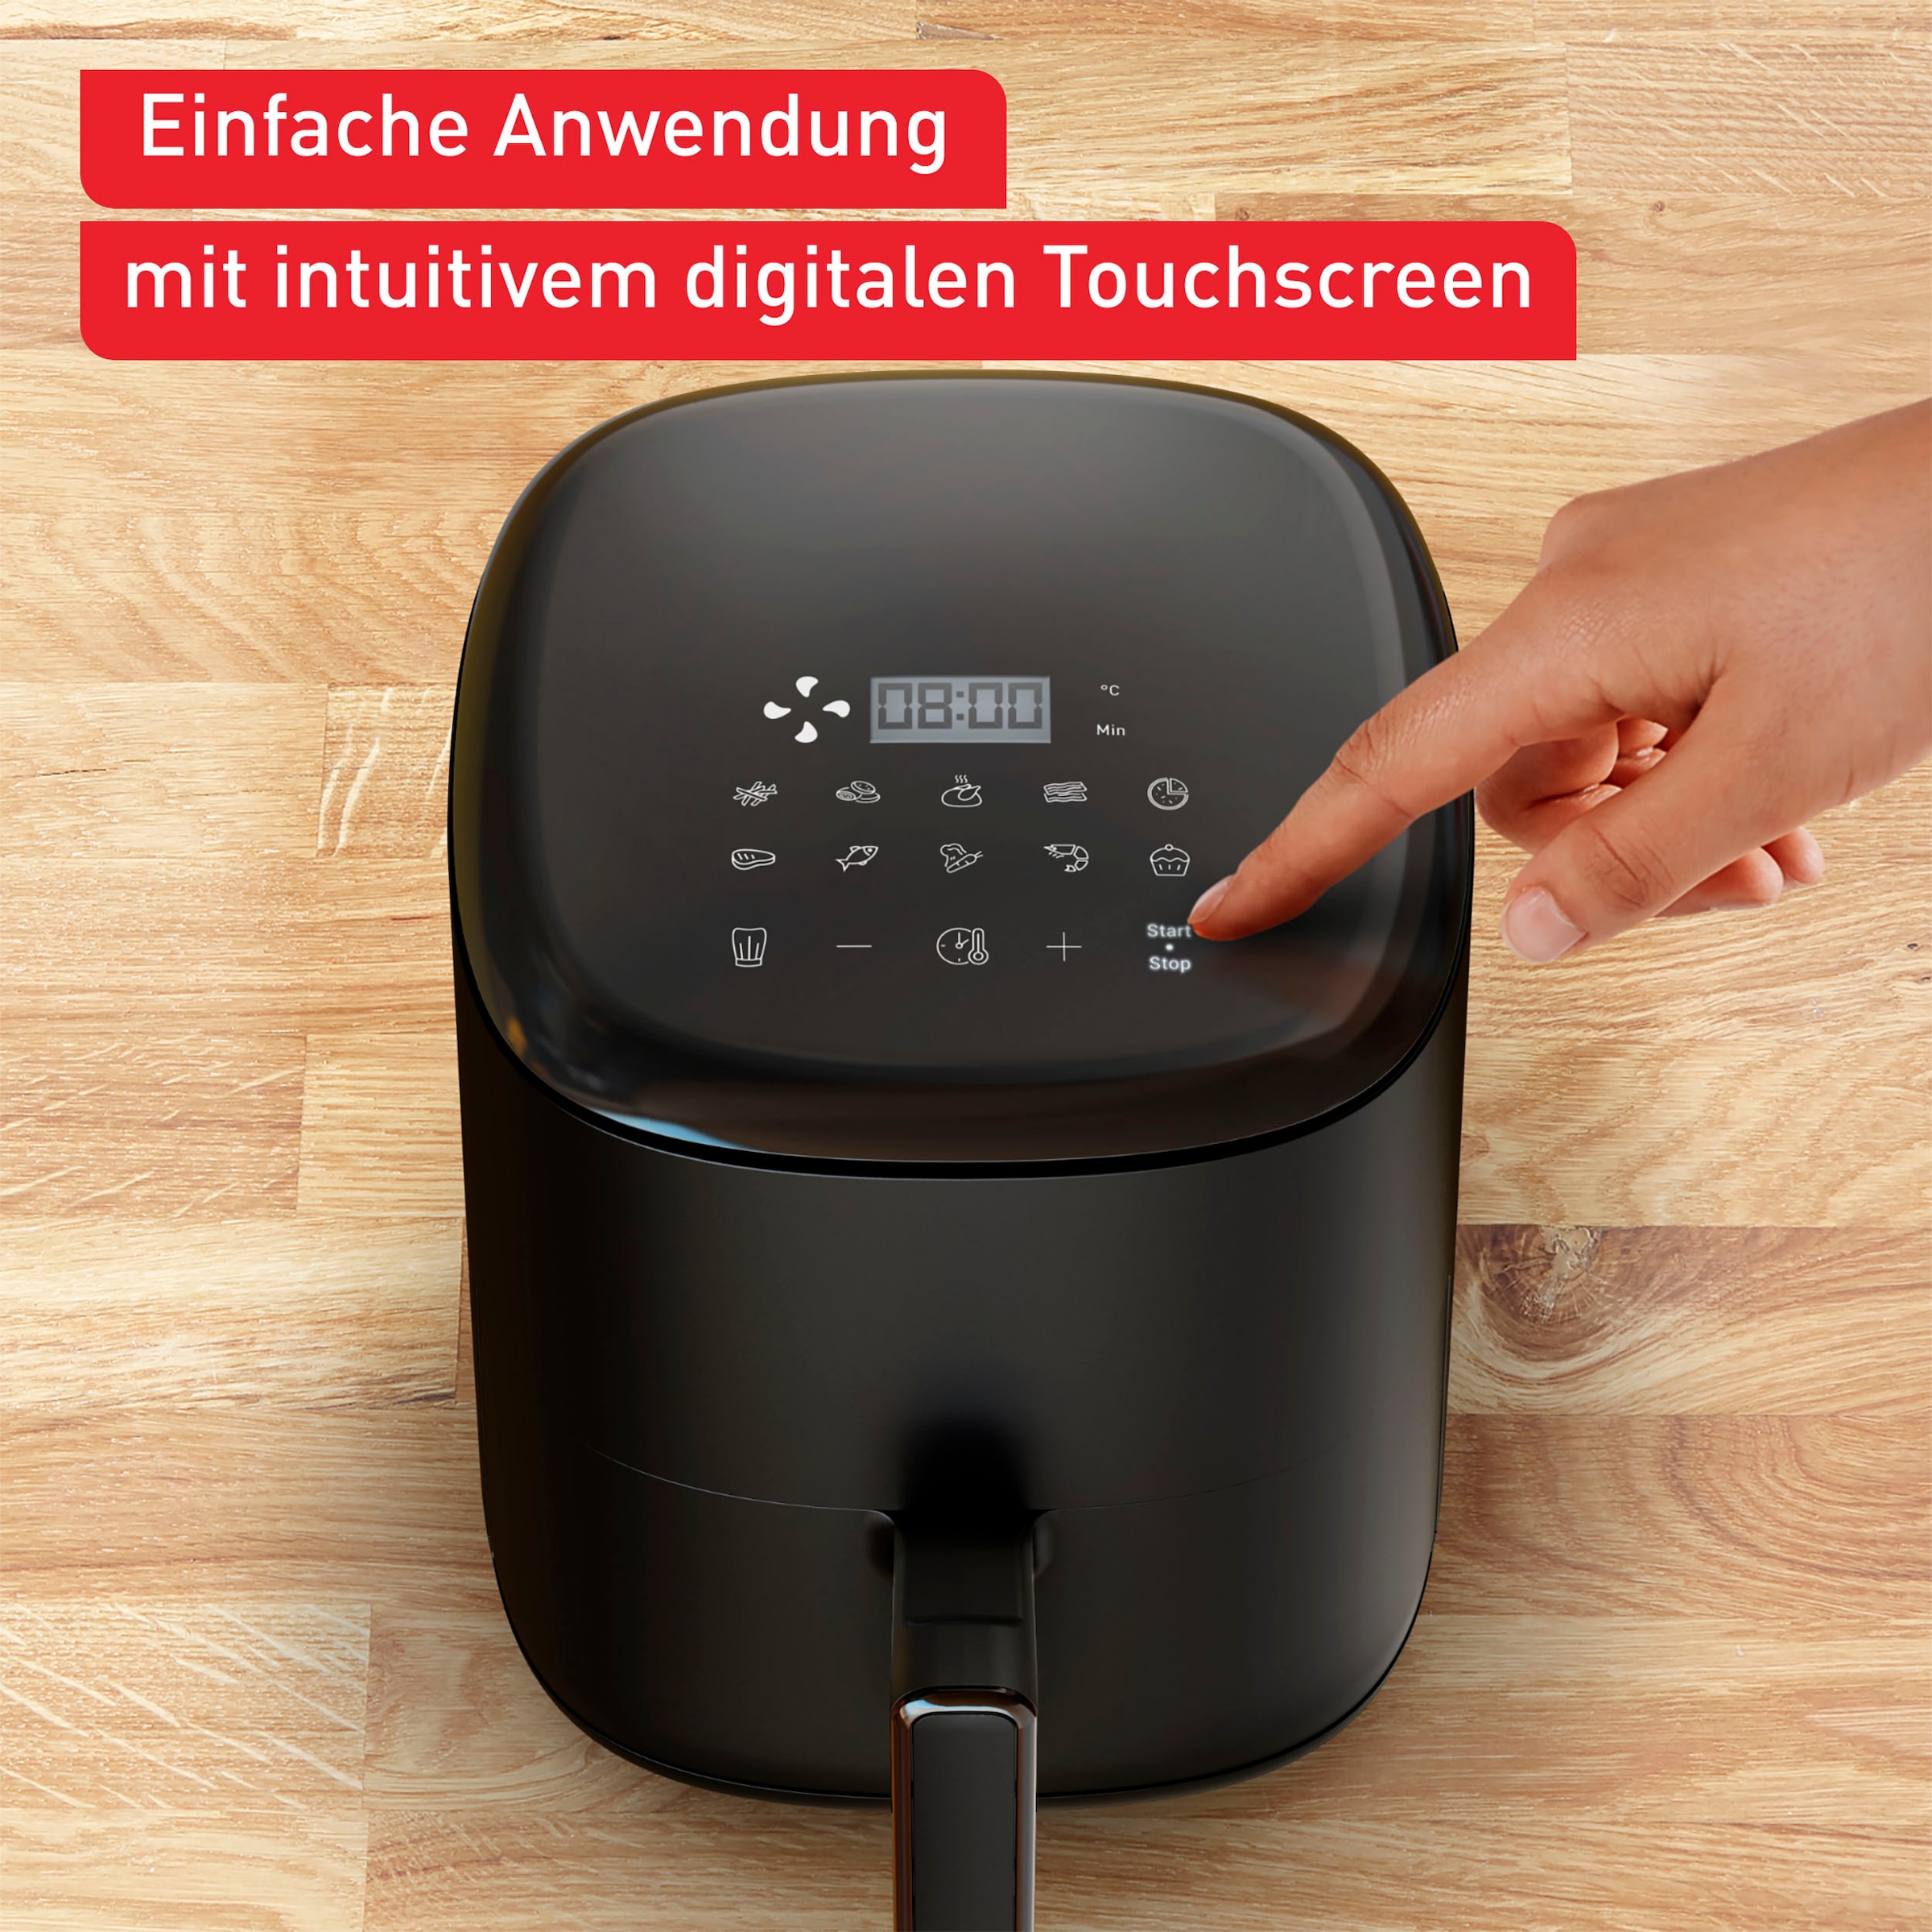 Heißluftfritteuse Tefal W Easy Compact«, Shop OTTO »EY1458 Fry Online im 1300